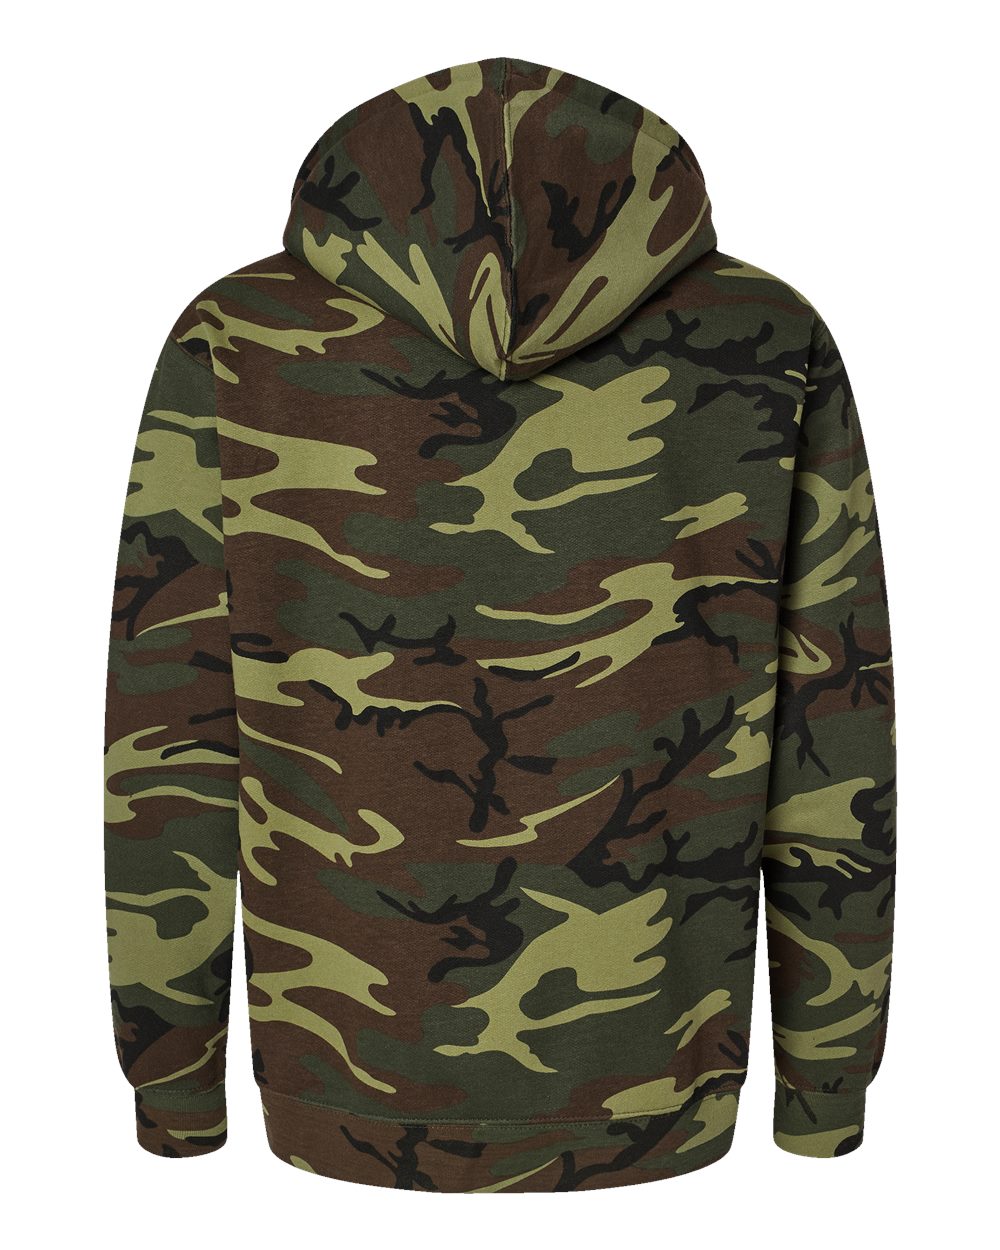 Code Five Mens Adult Camo Pullover Fleece Hoodie Hooded 3969 up to 3XL ...